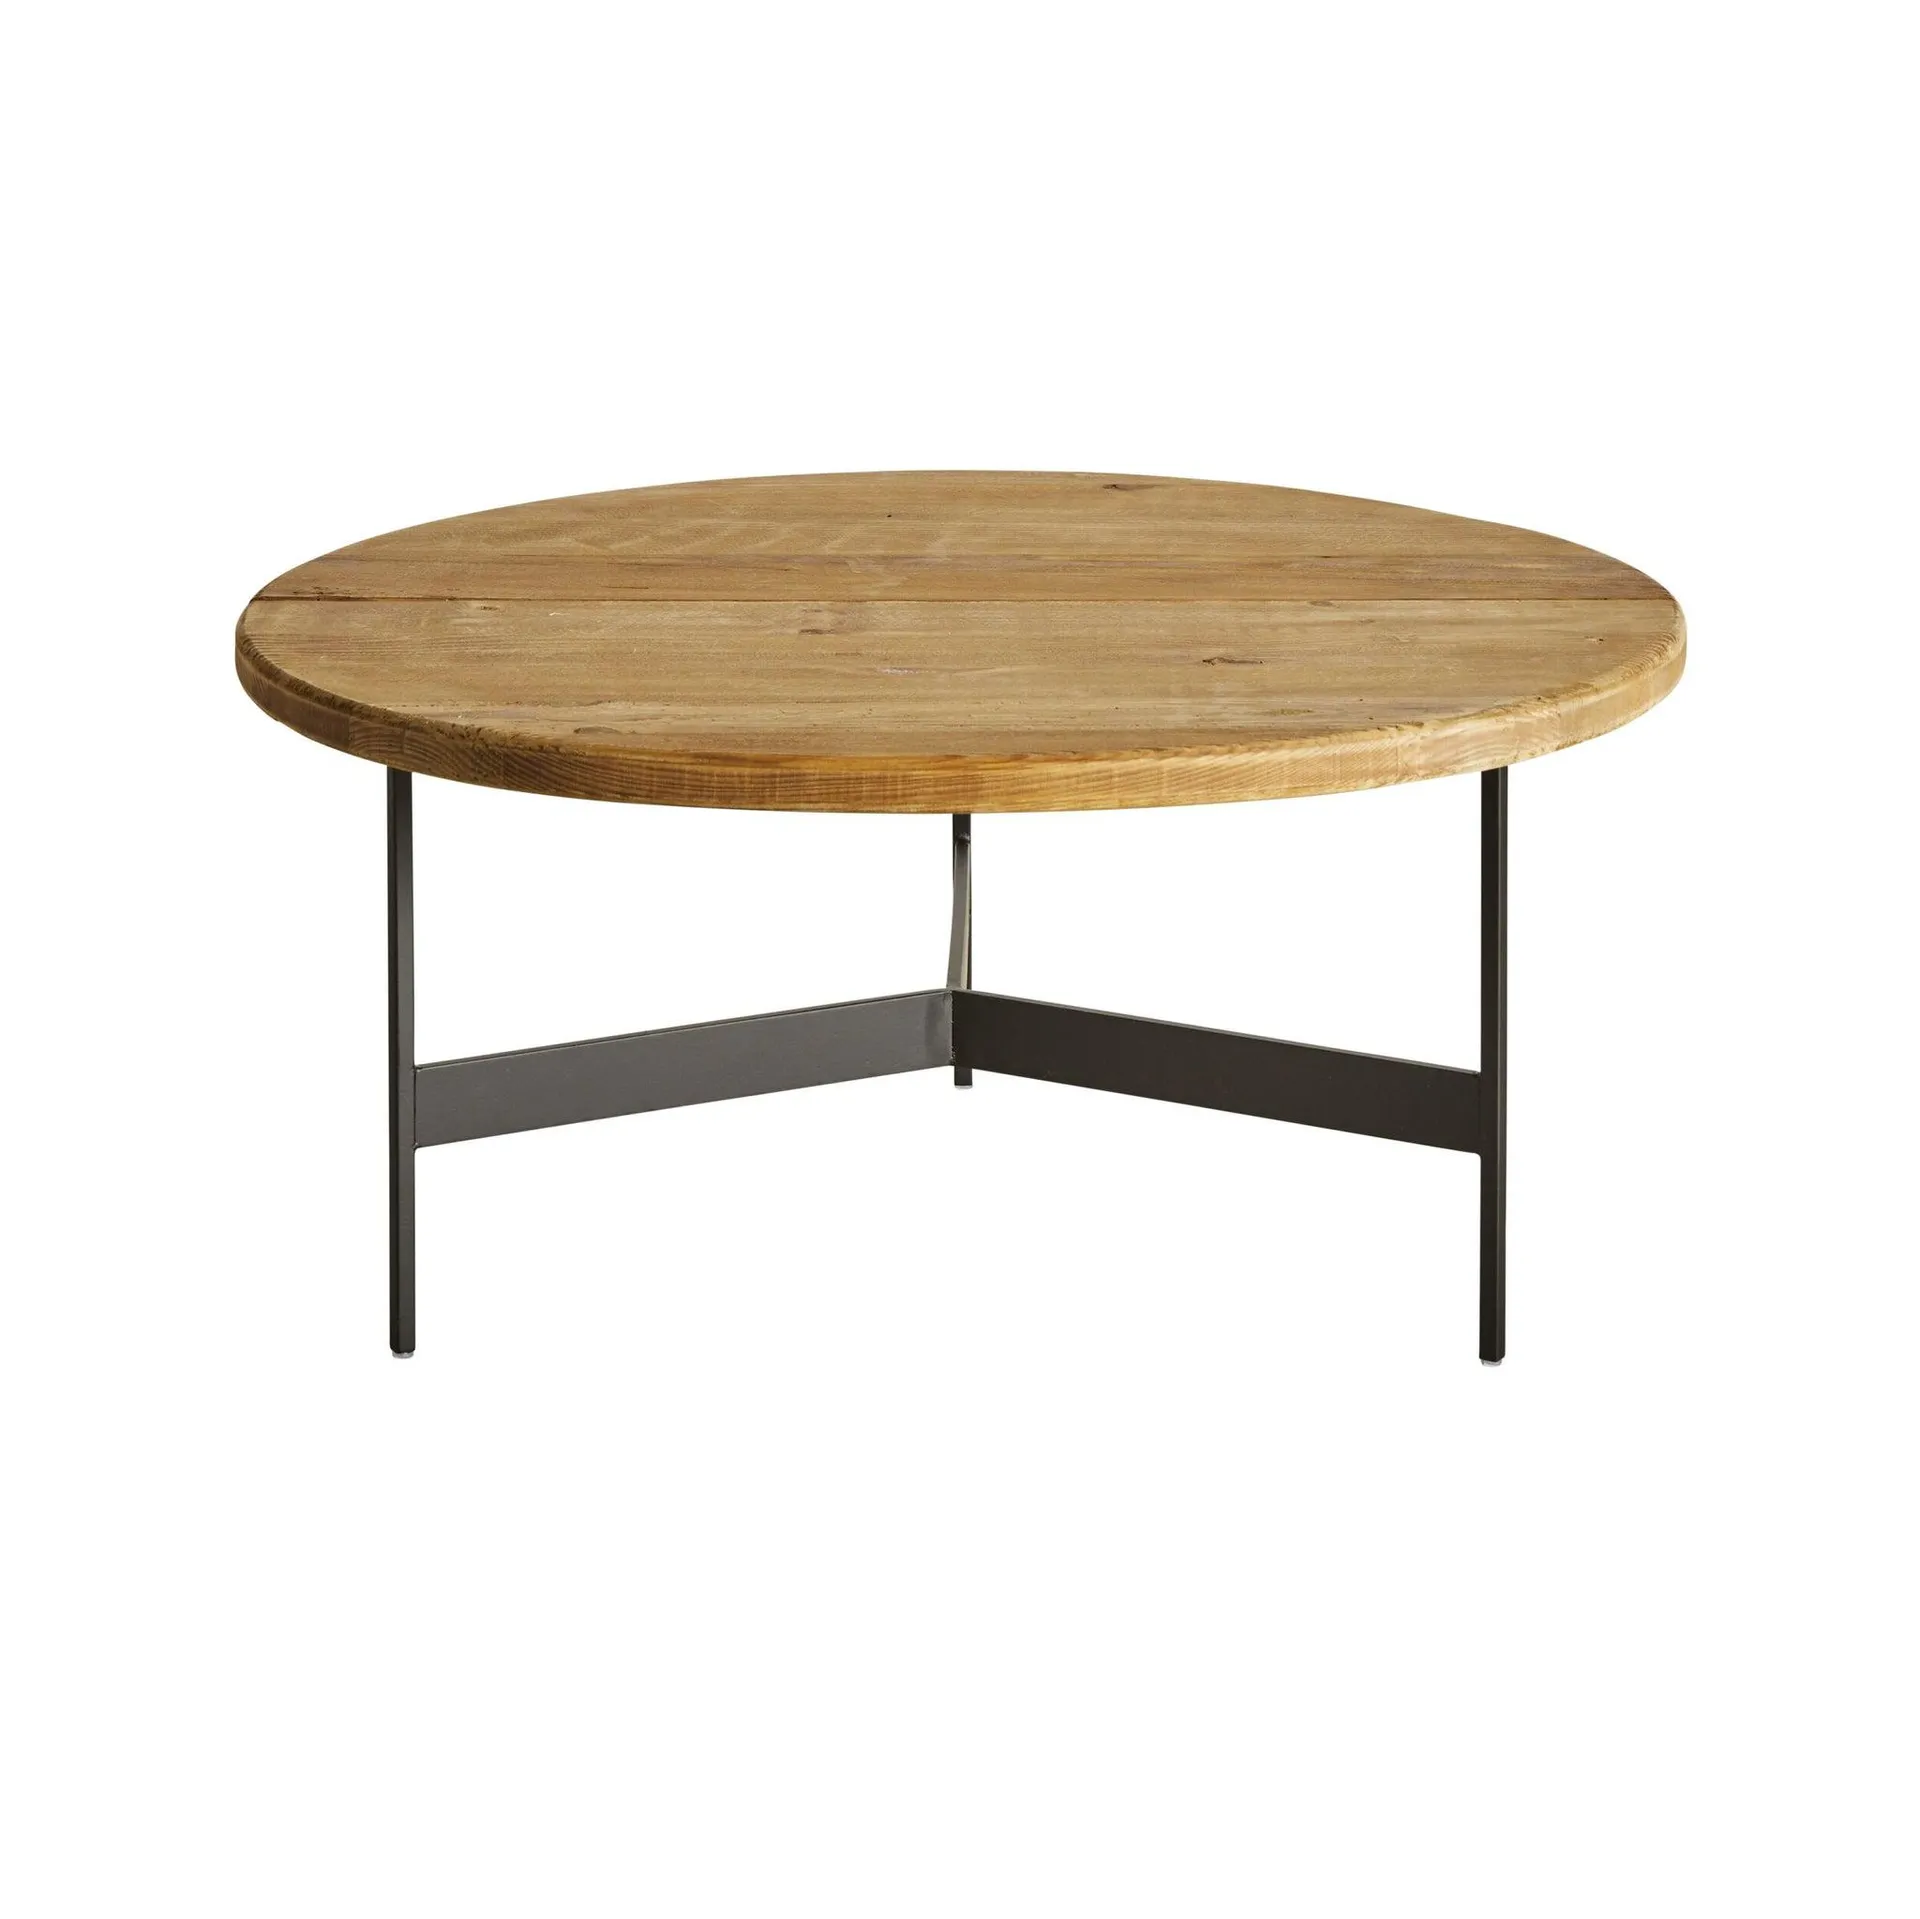 Kalise Coffee Round Table with Metal Base